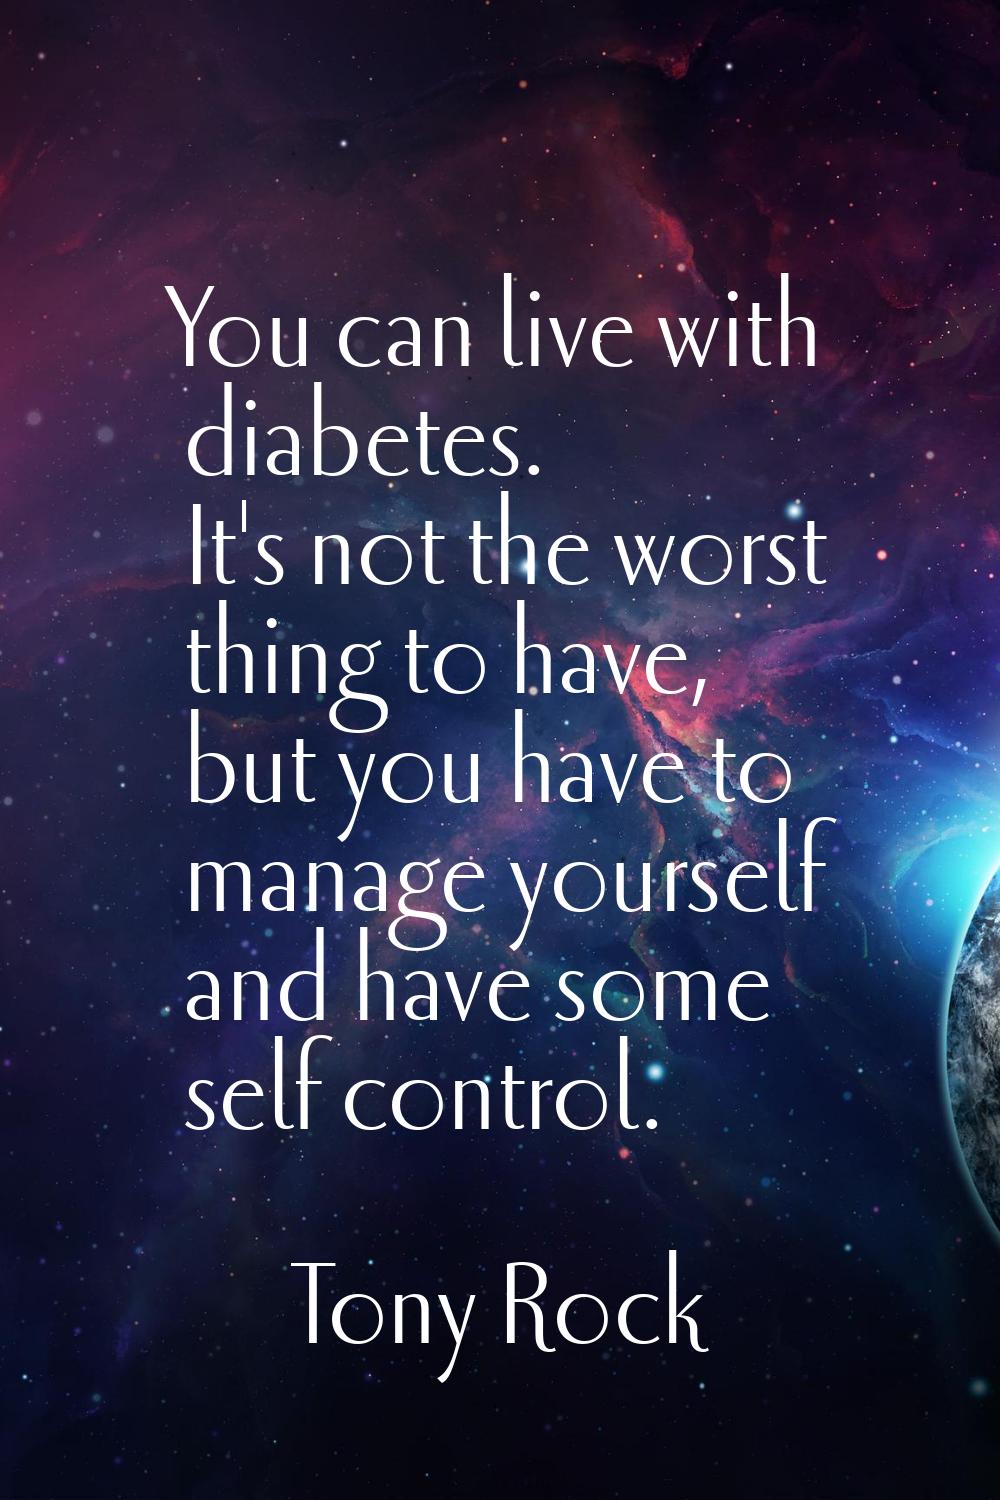 You can live with diabetes. It's not the worst thing to have, but you have to manage yourself and h